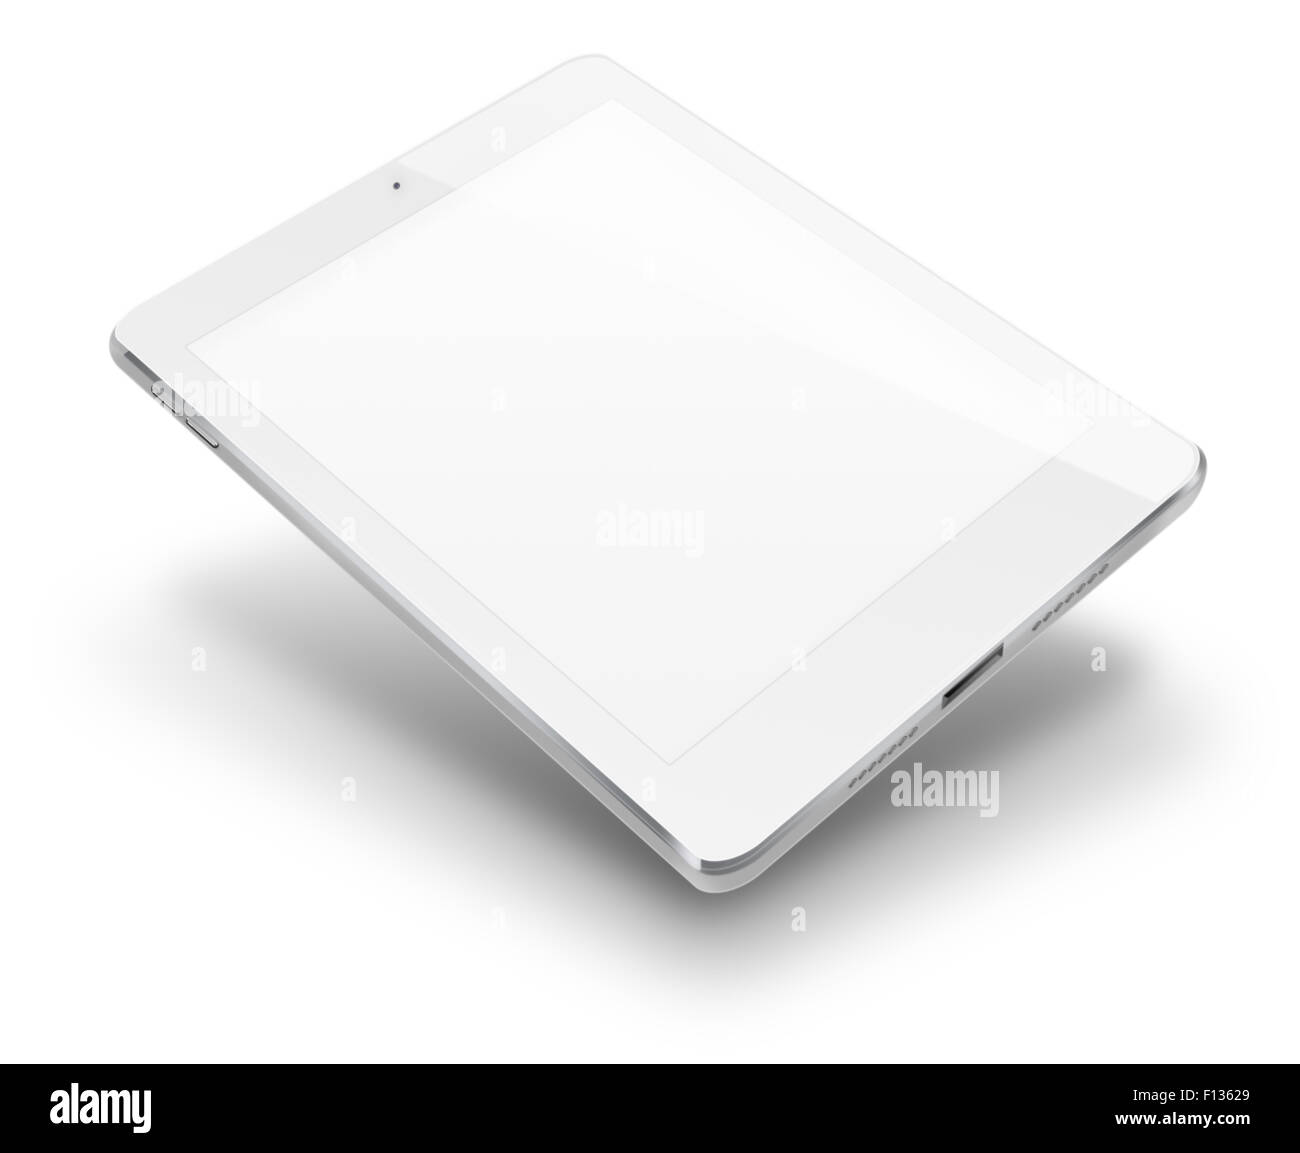 Tablet computer with blank screen isolated on white background. Highly detailed illustration. Stock Photo